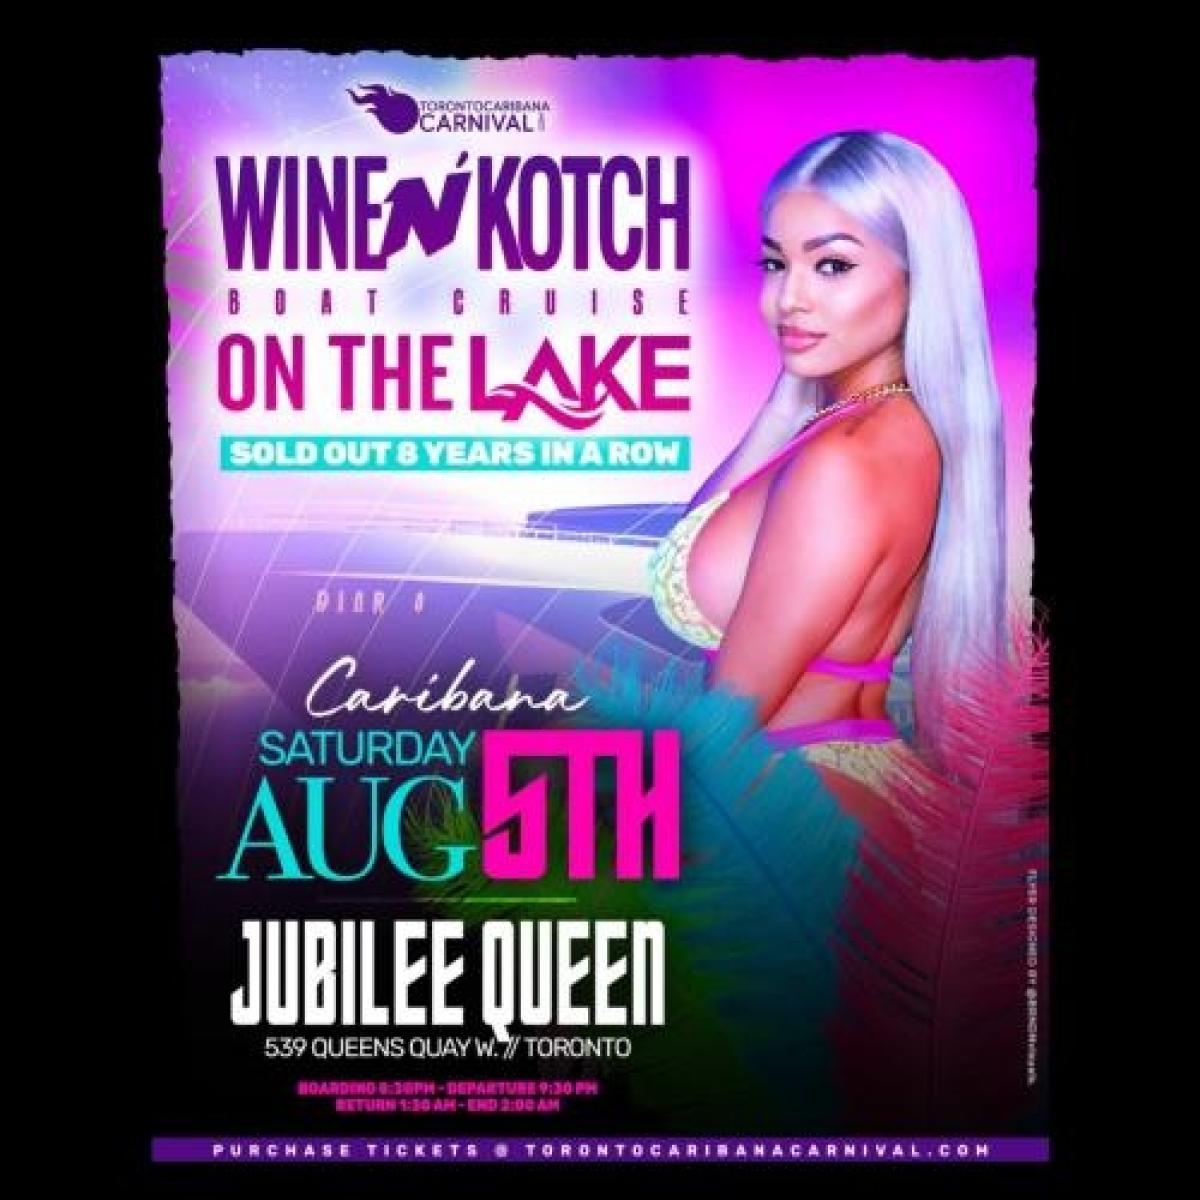 Wine n Kotch Boat Cruise flyer or graphic.